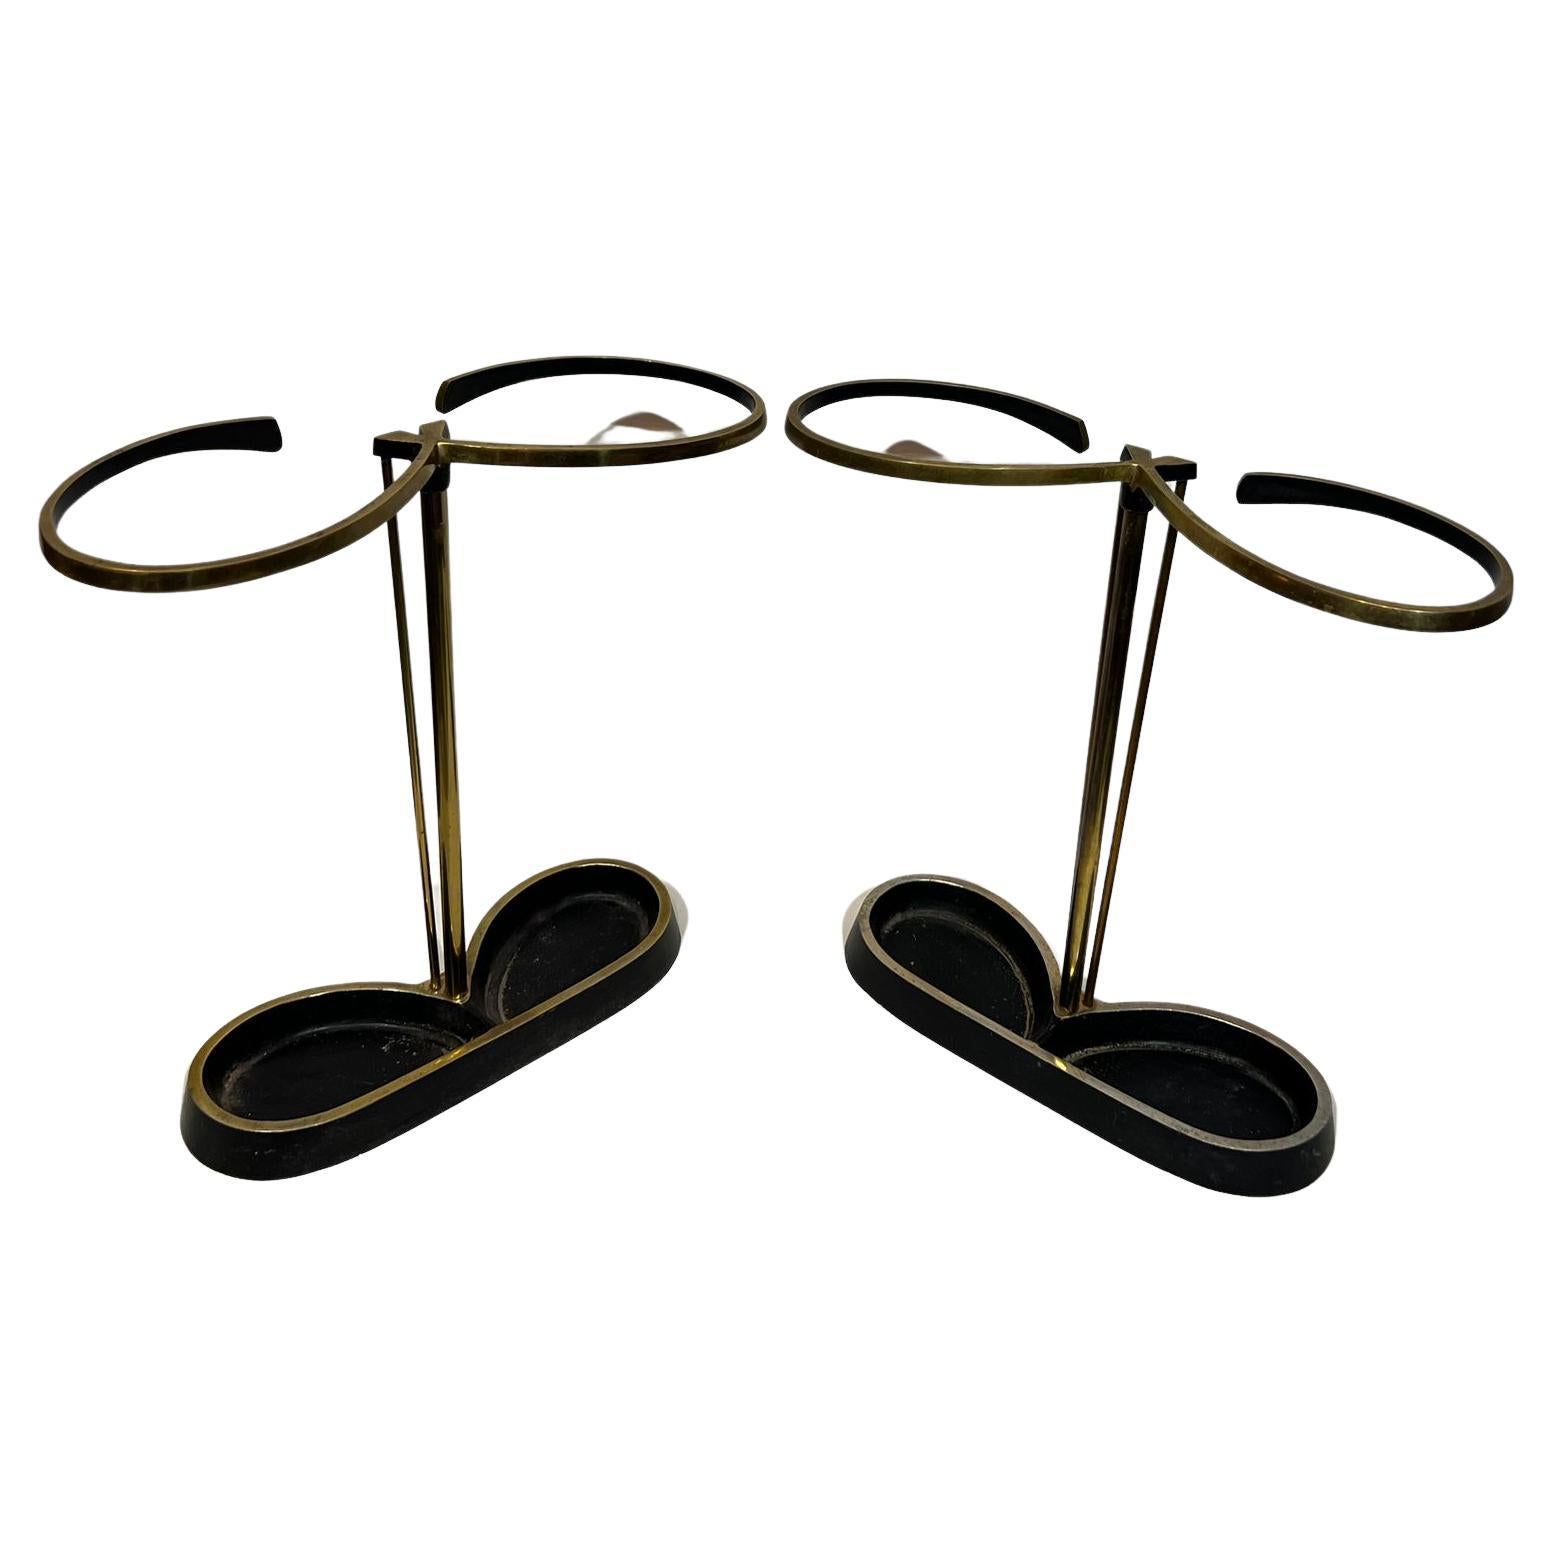 Two Umbrella Stands 1960s, Austria, Mid Century, In Good Condition For Sale In Vienna, AT